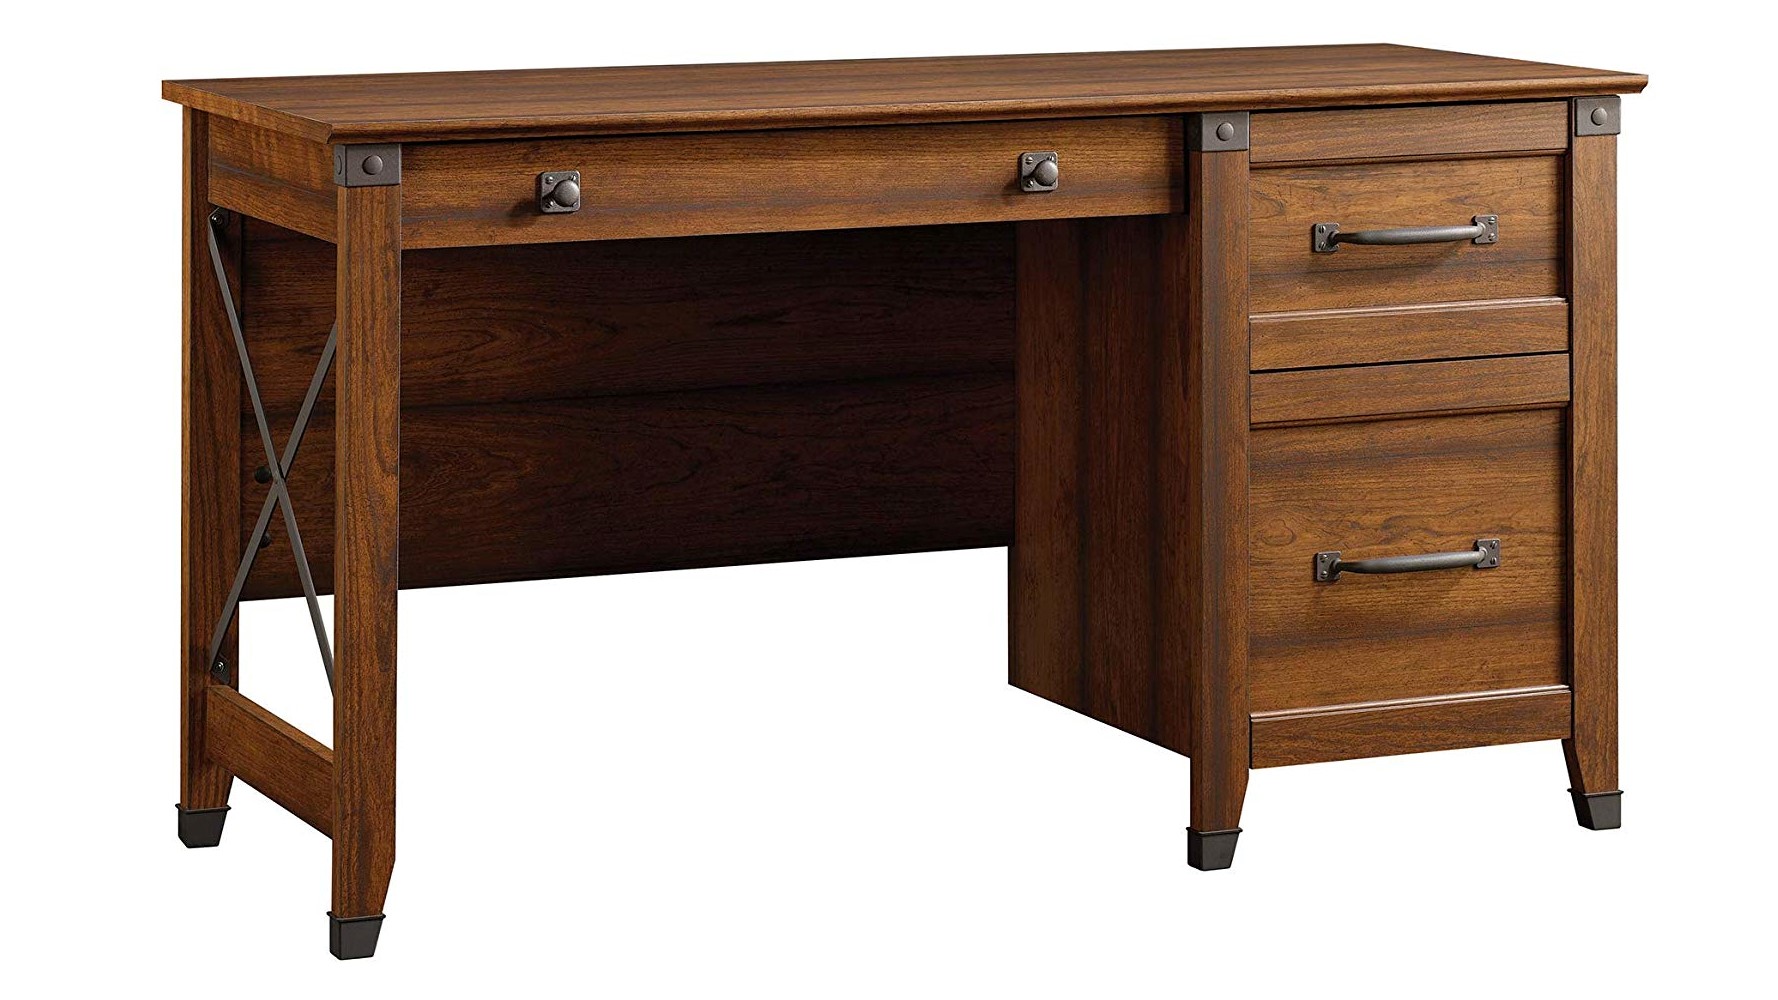 Sauder Carson Forge Desk for your home office